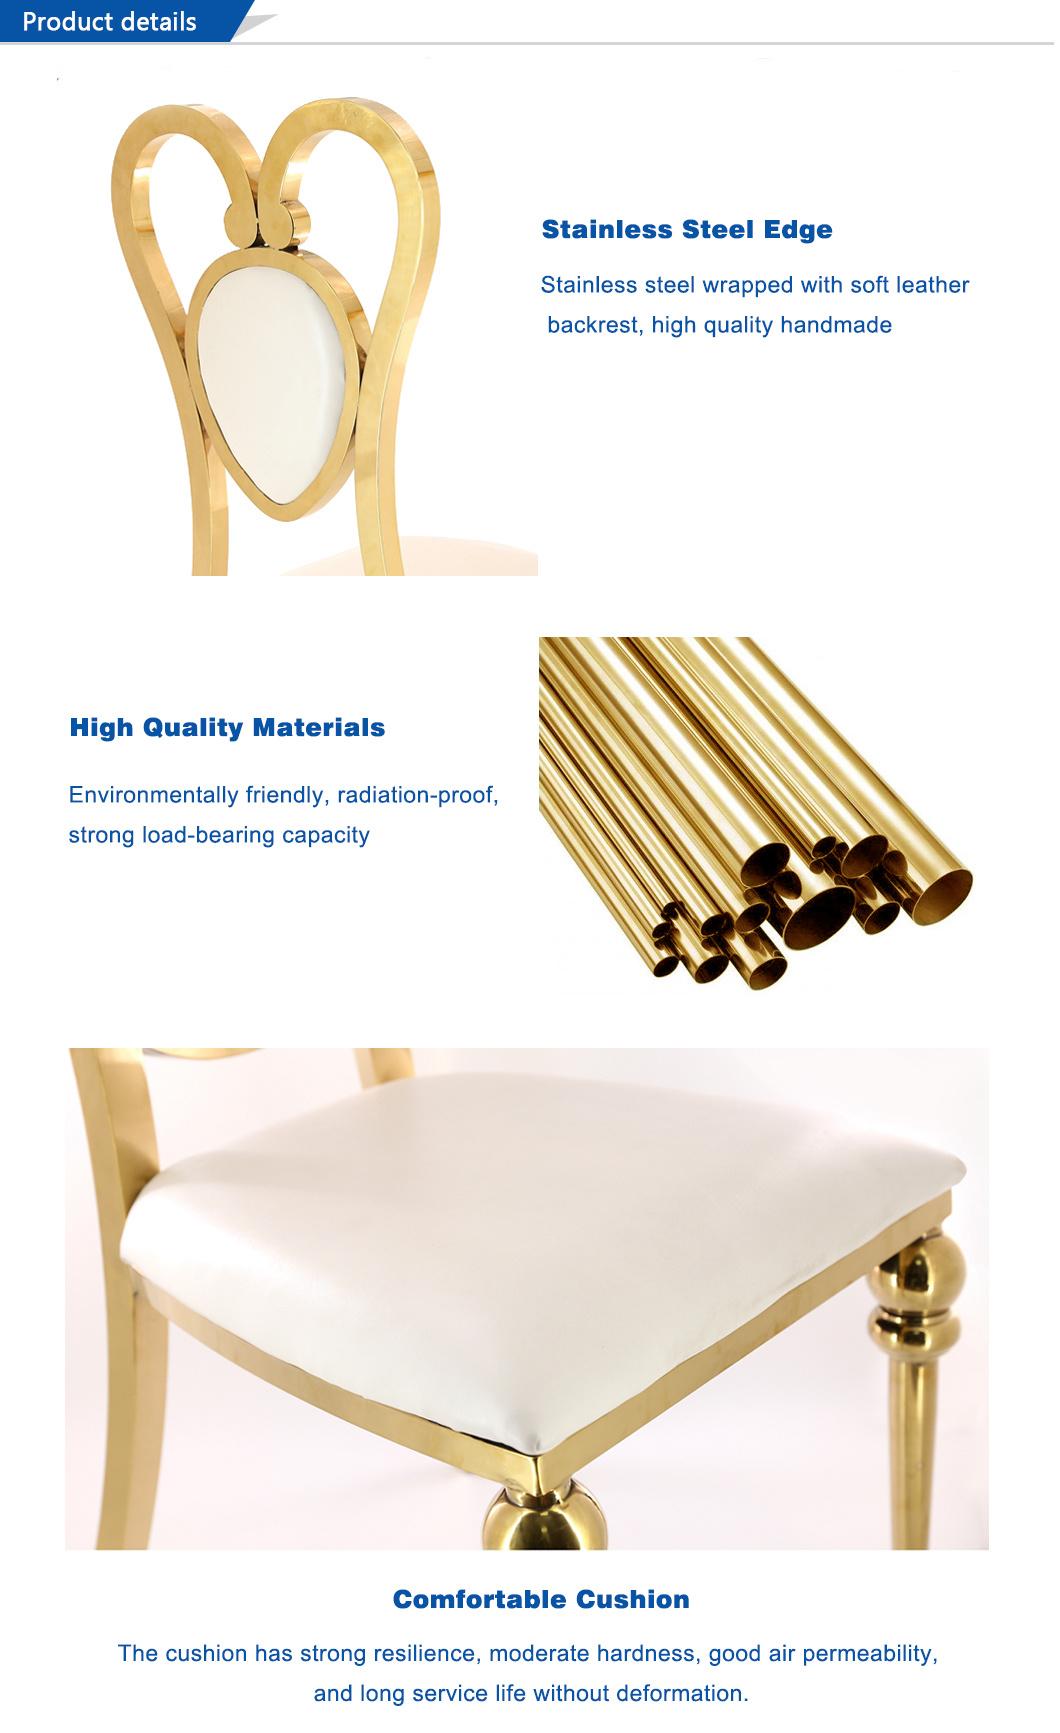 Modern Design Banquet Wedding Party Event Gold Stainless Steel Frame Dining Chair